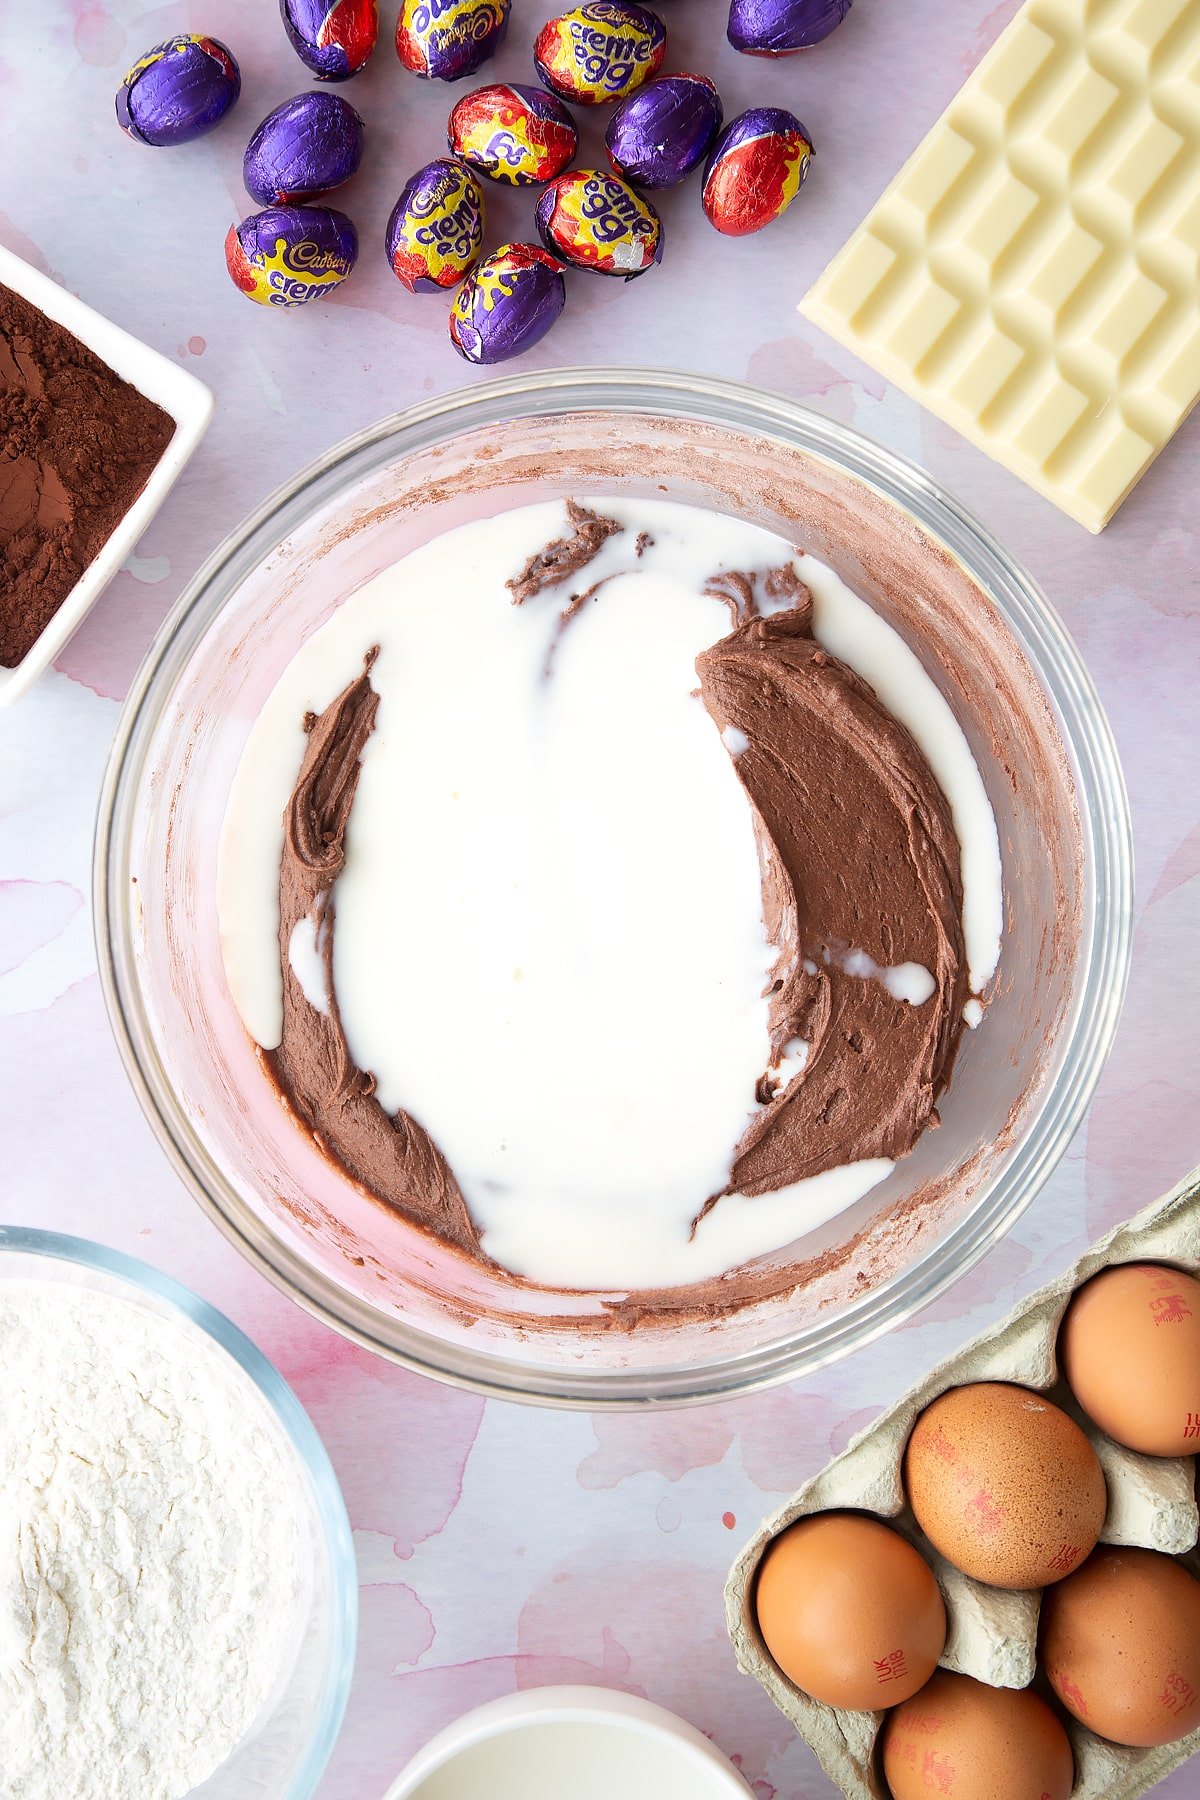 Thick chocolate cake batter in a bowl with milk on top. Ingredients to make Cadbury Creme Egg cakes surround the bowl.